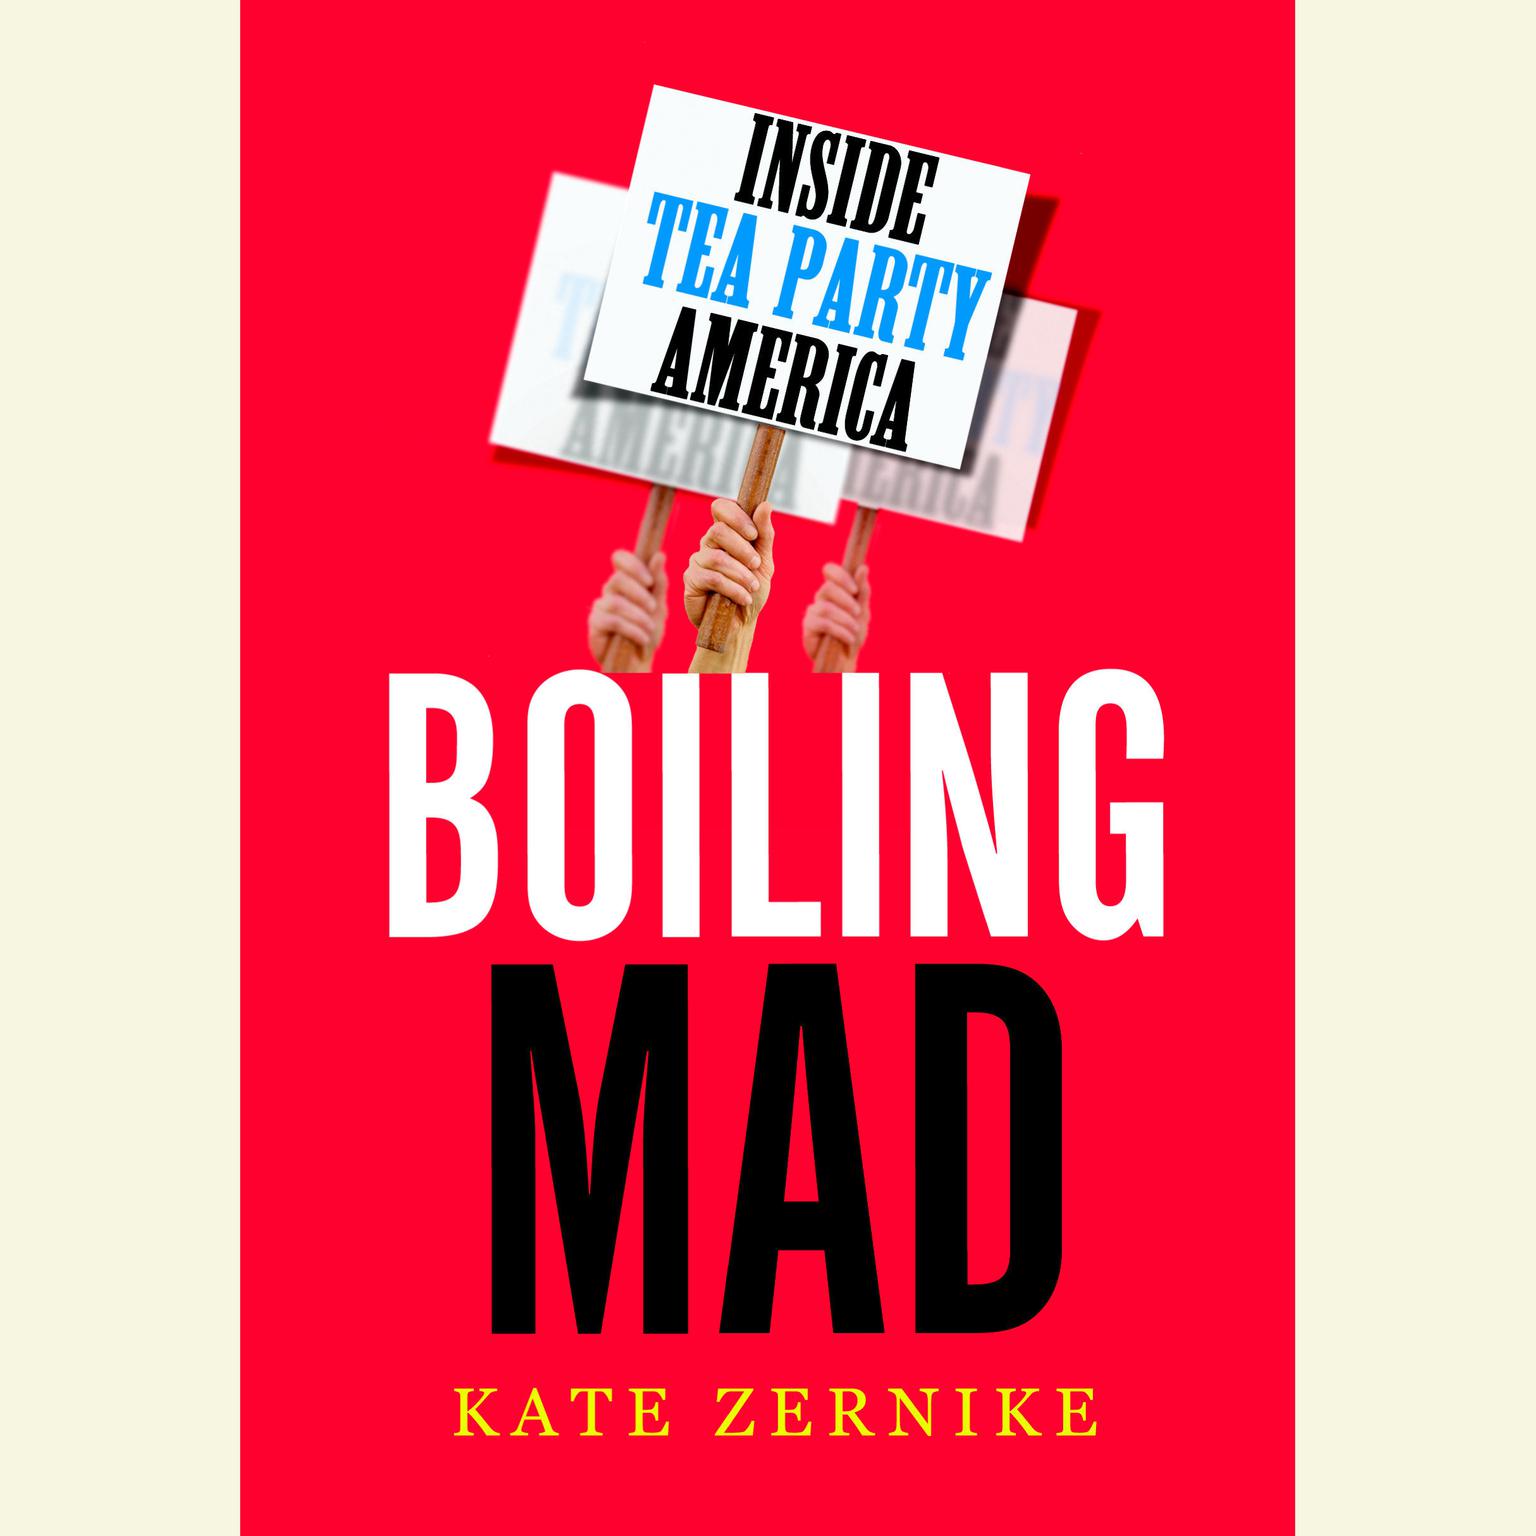 Boiling Mad: Inside Tea Party America Audiobook, by Kate Zernike